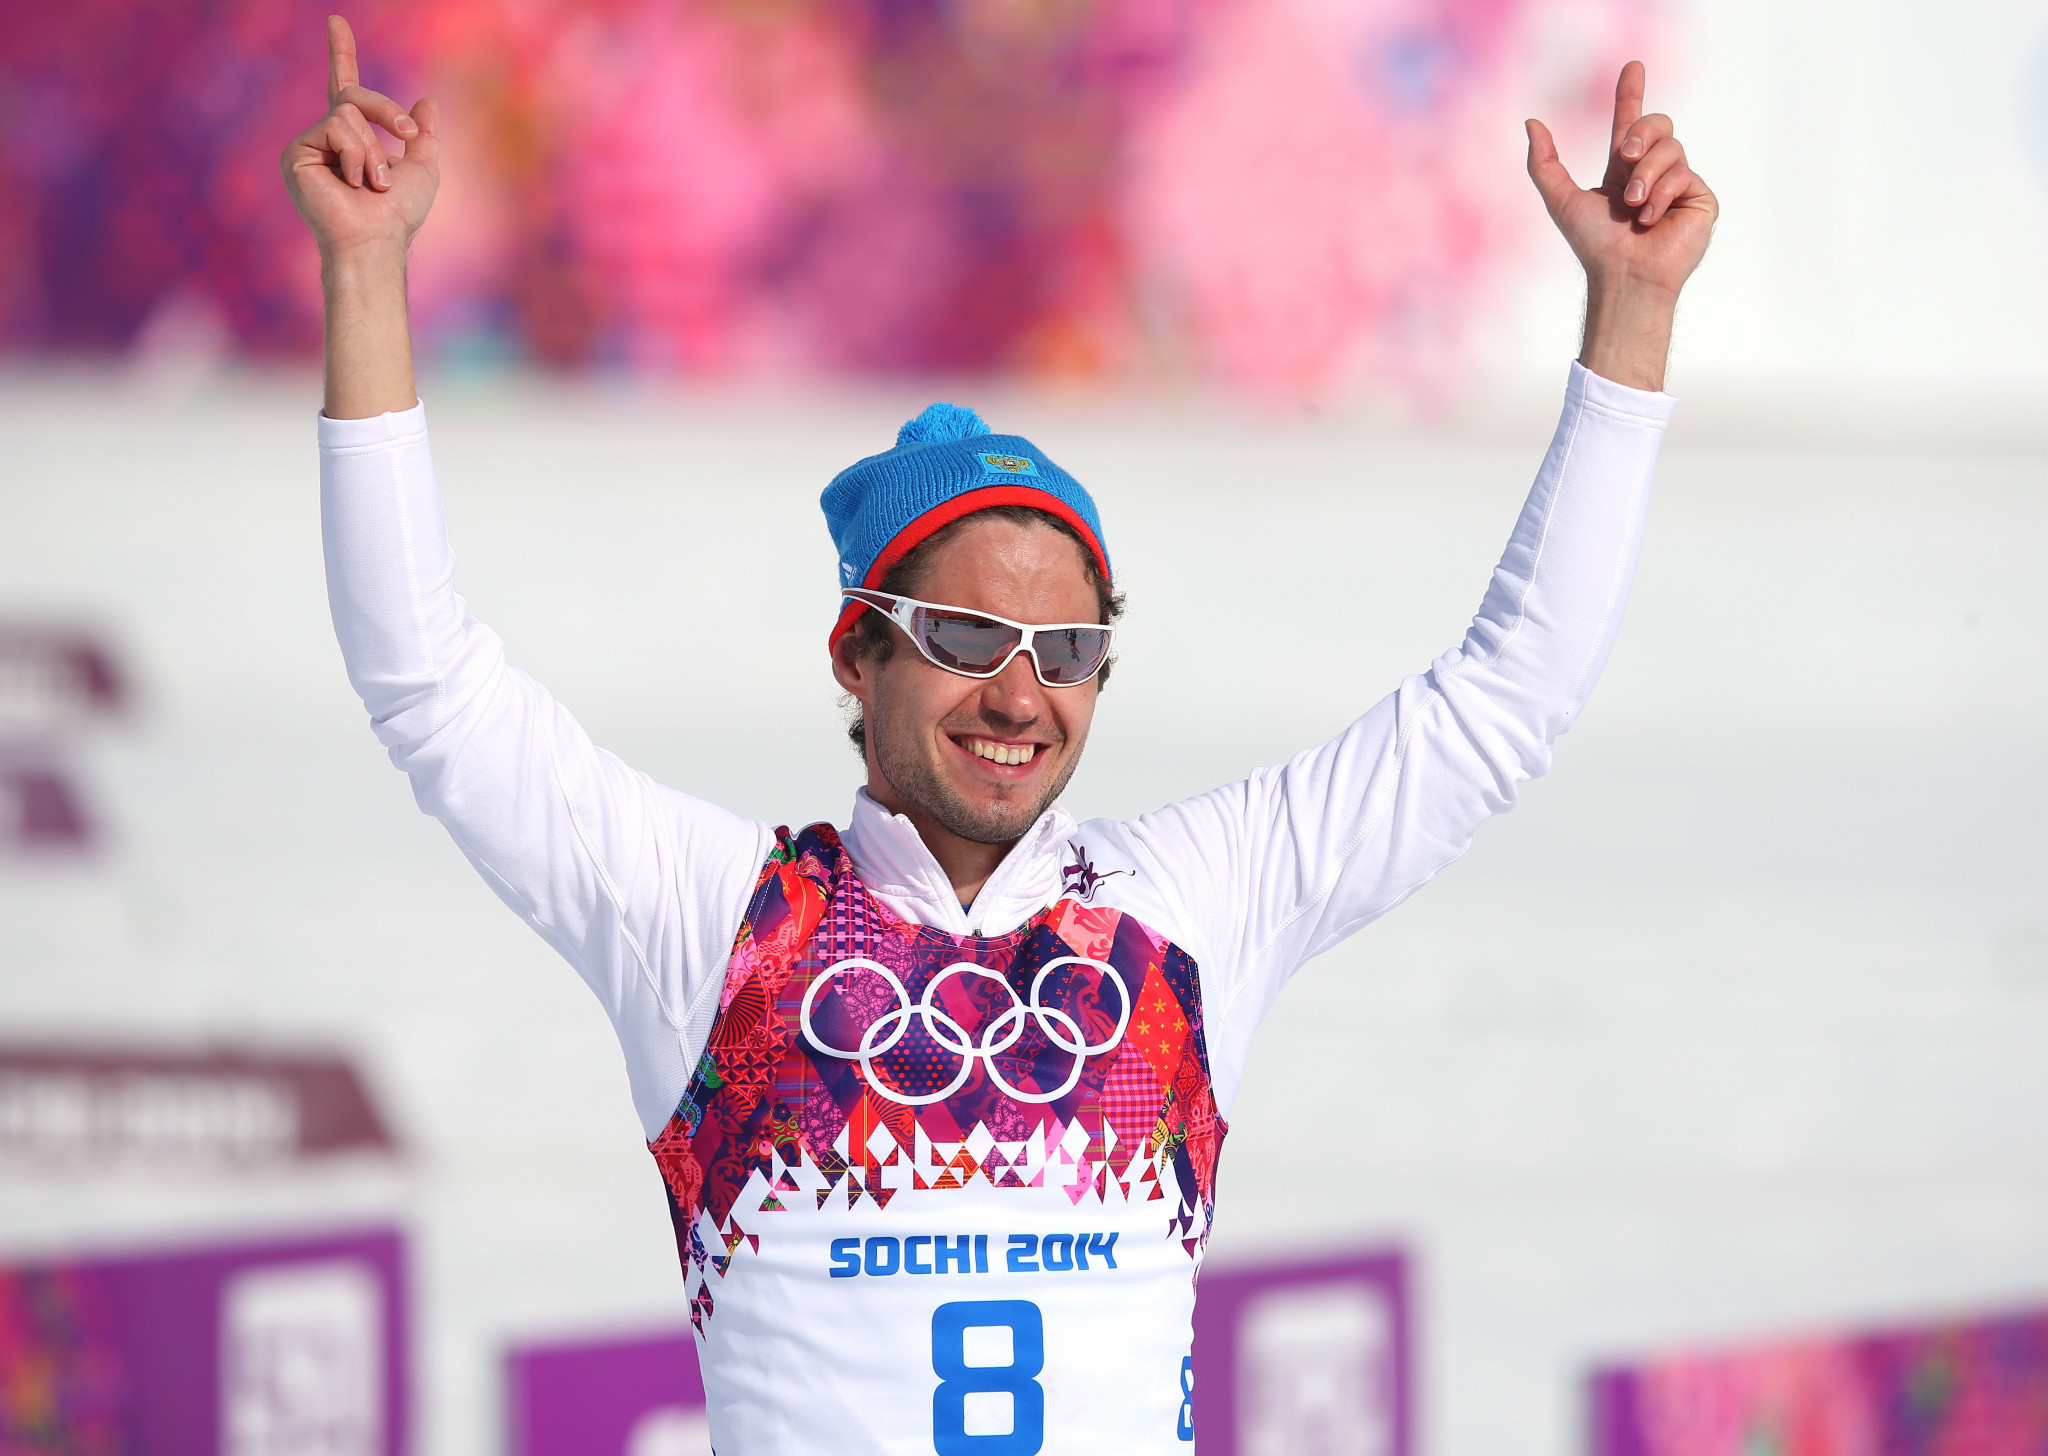 Ilia Chernousov earned a bronze medal for Russia at the Sochi 2014 Winter Olympic Games ©Getty Images